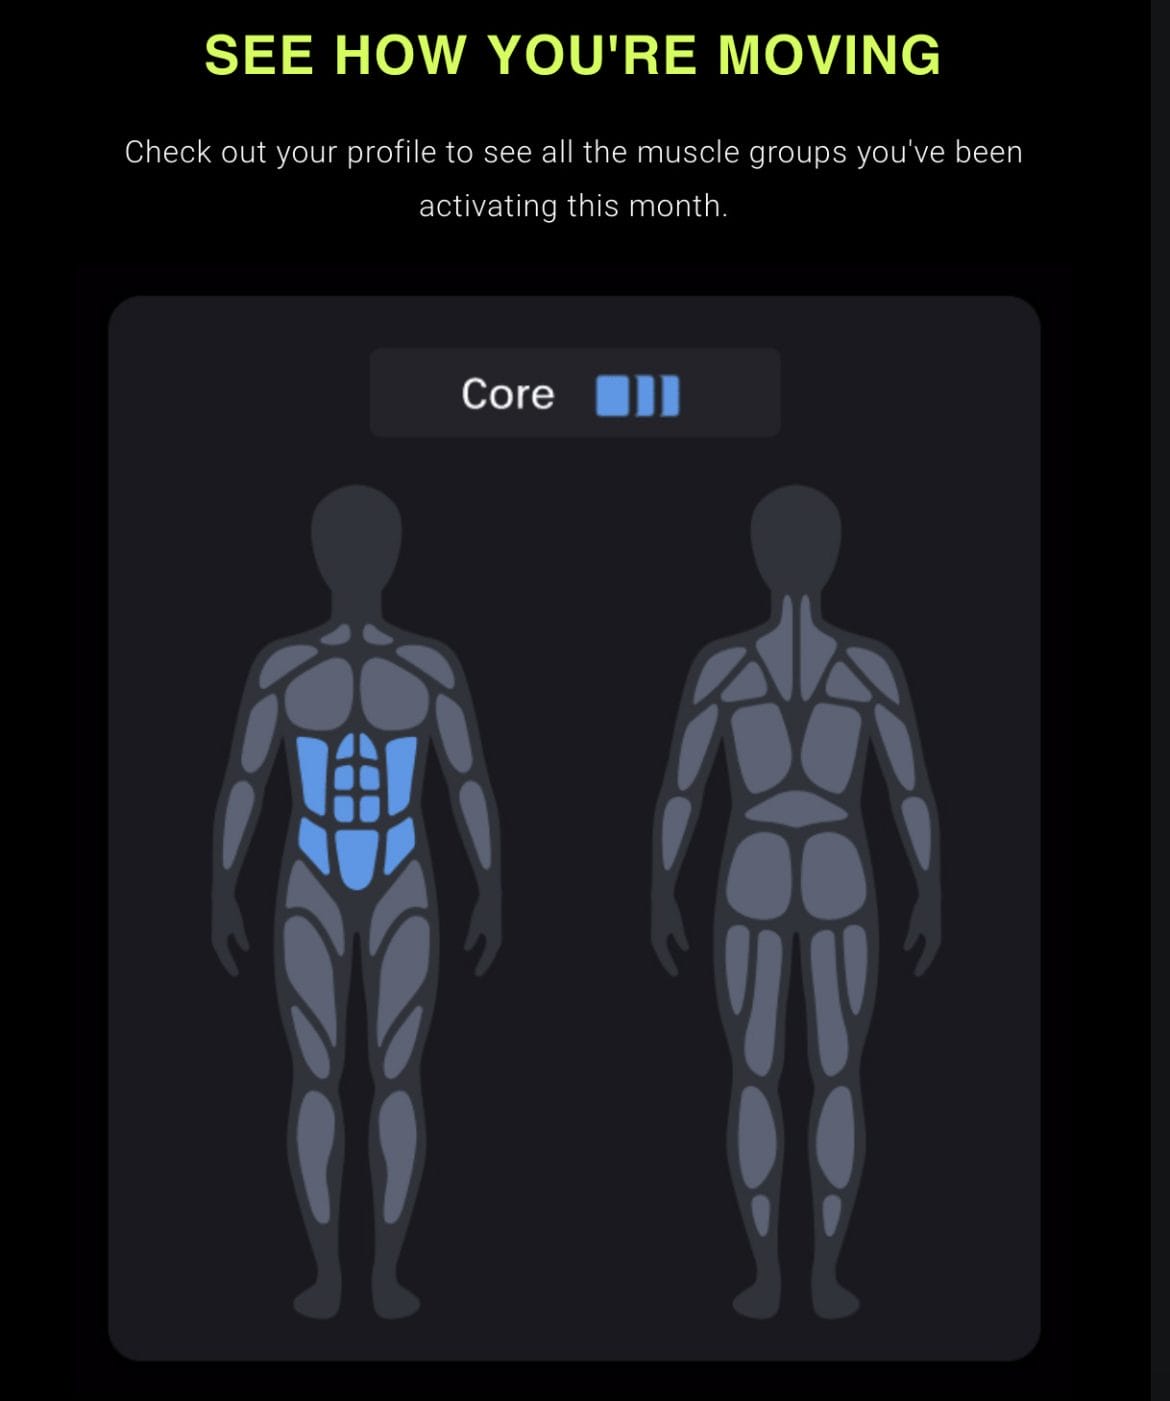 New body activity section in Peloton monthly recap email.